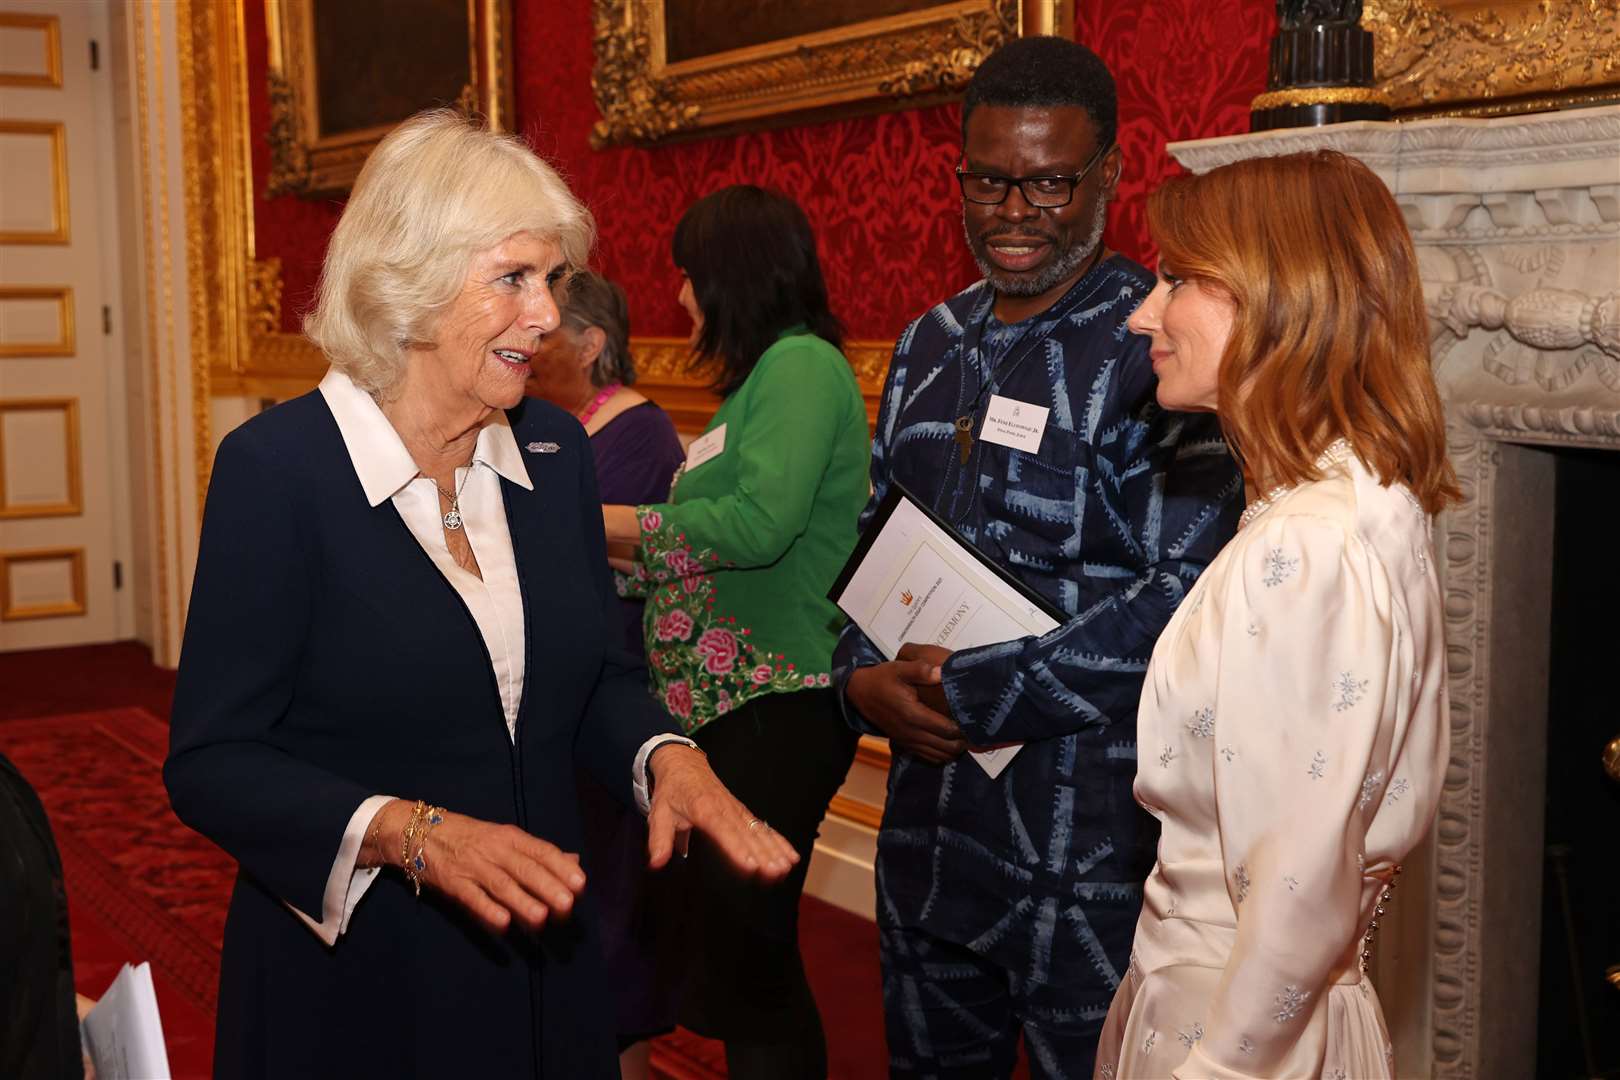 The Duchess of Cornwall meets Femi Elufowoju Jr and Geri Horner during the awards ceremony for the essay competition (Chris Jackson/PA)